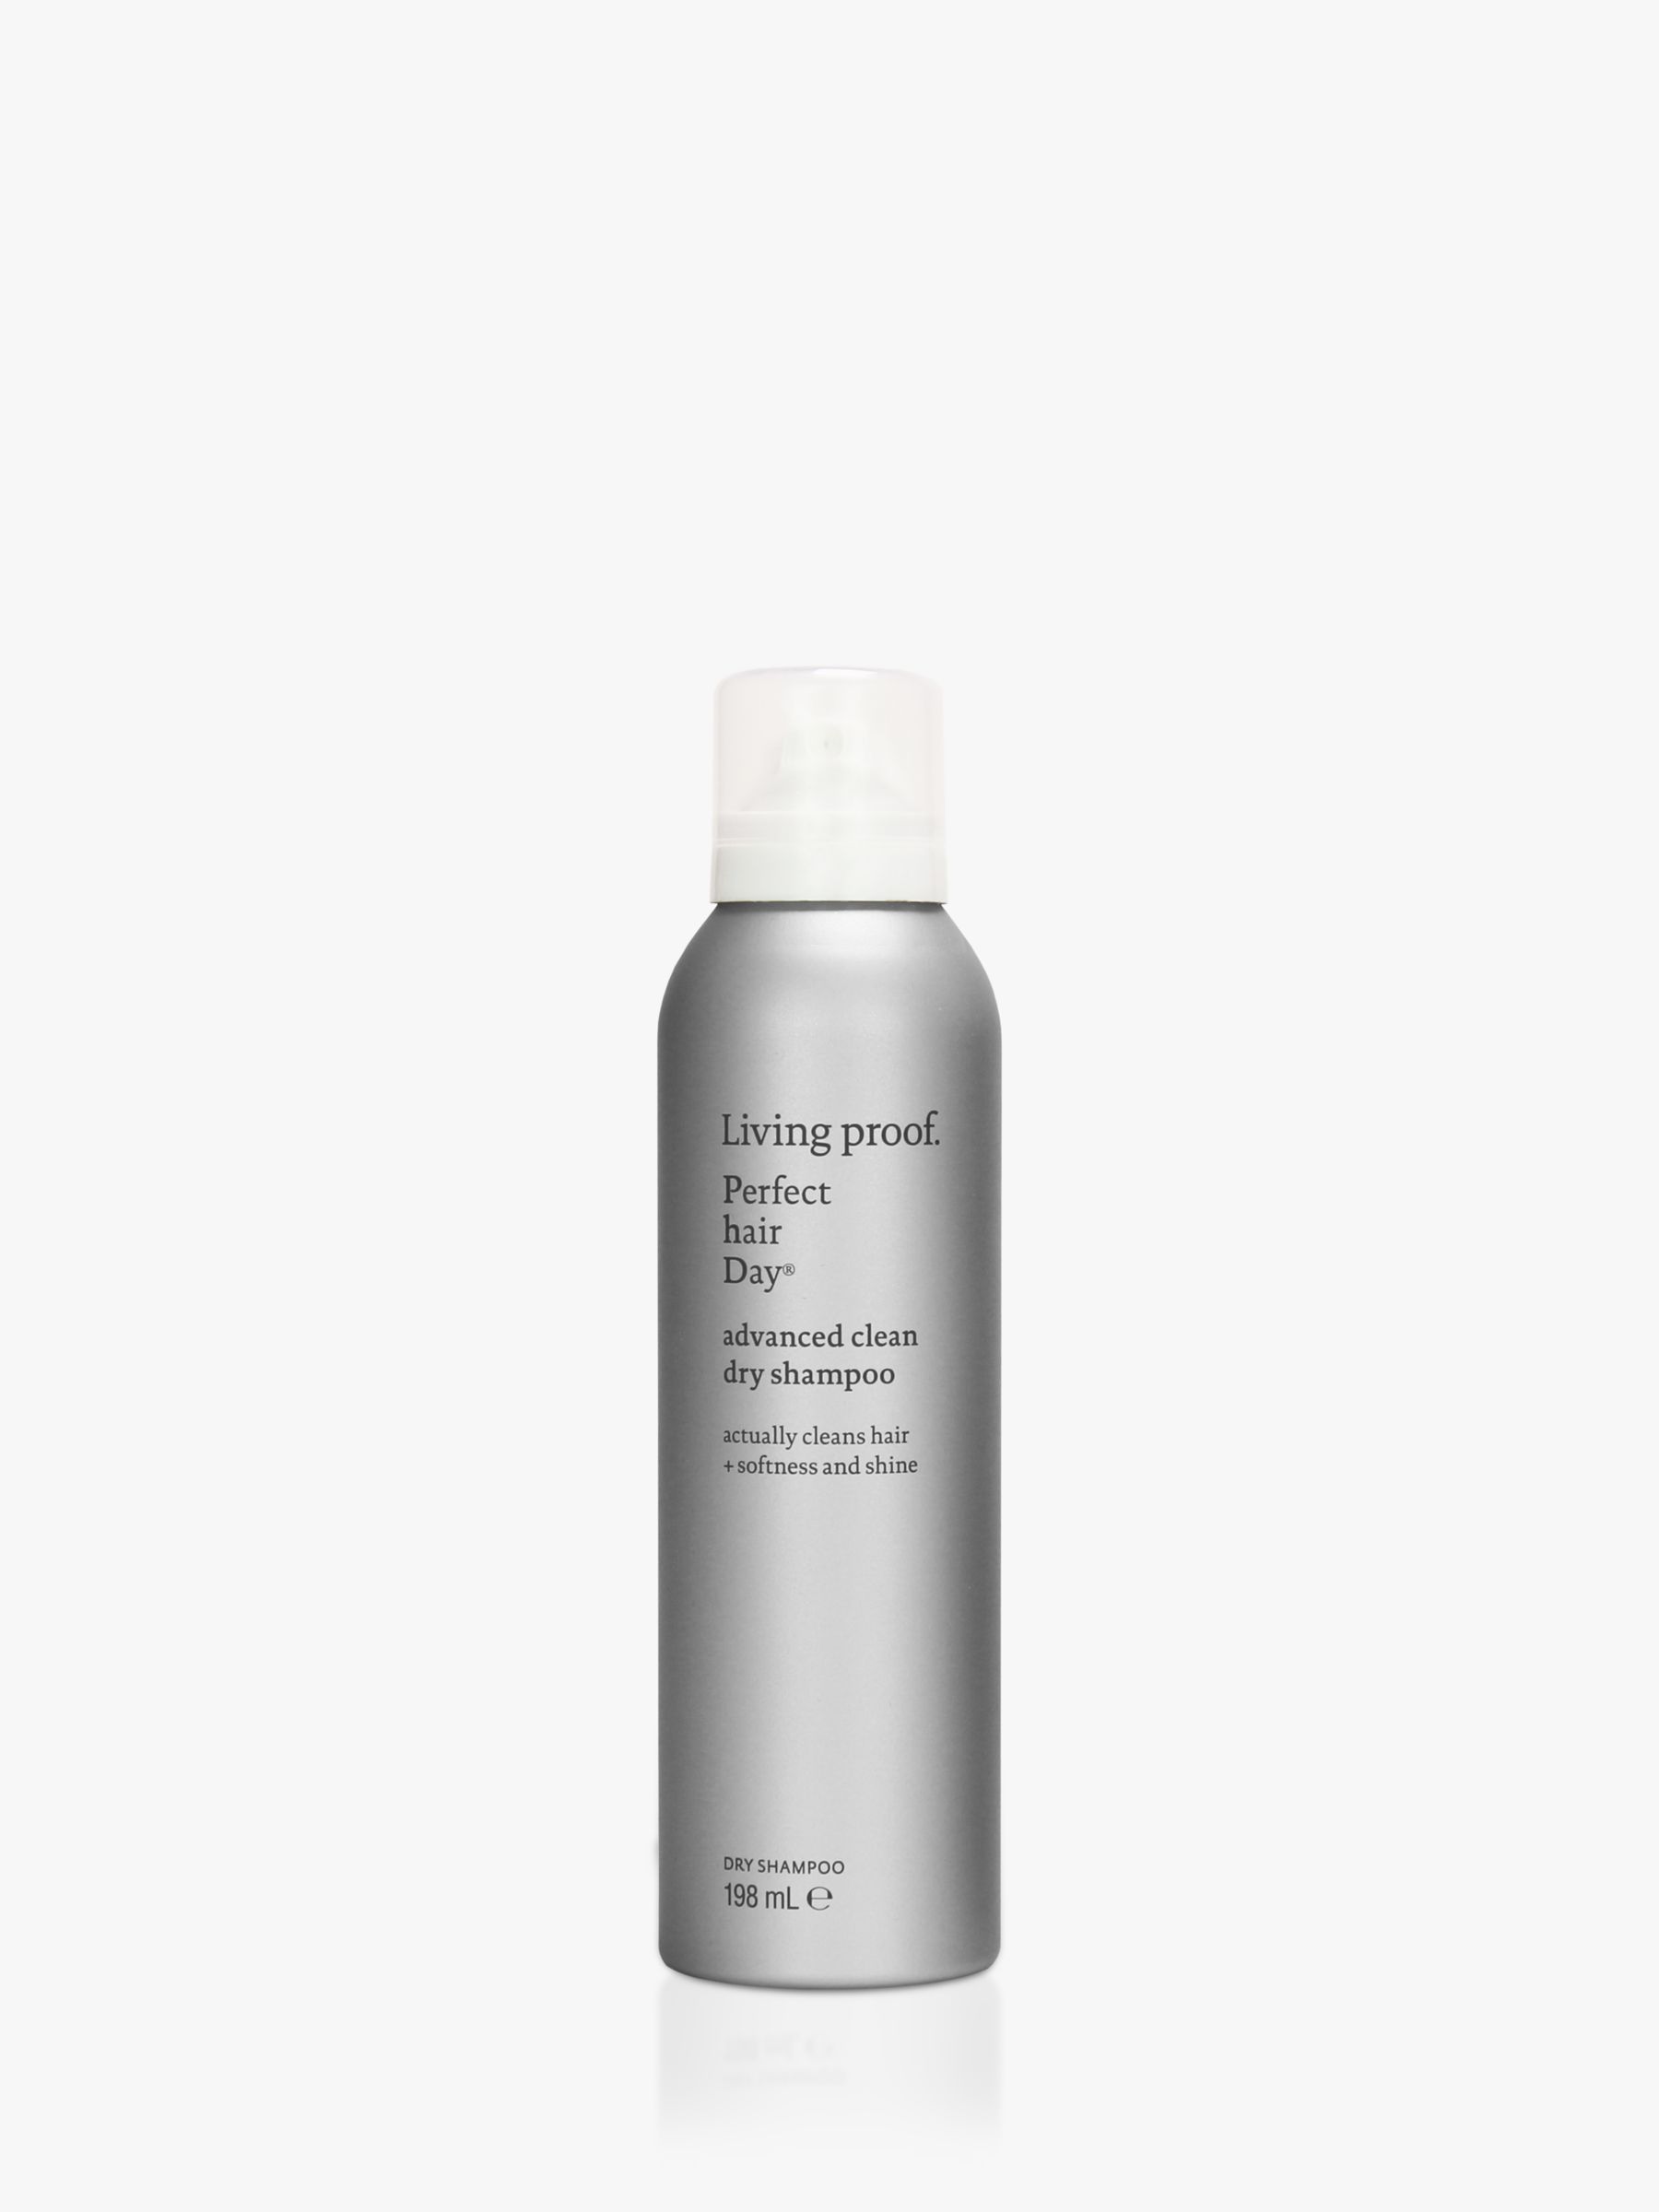 Living Proof Perfect Hair Day Advanced Clean Dry Shampoo, 198ml 1